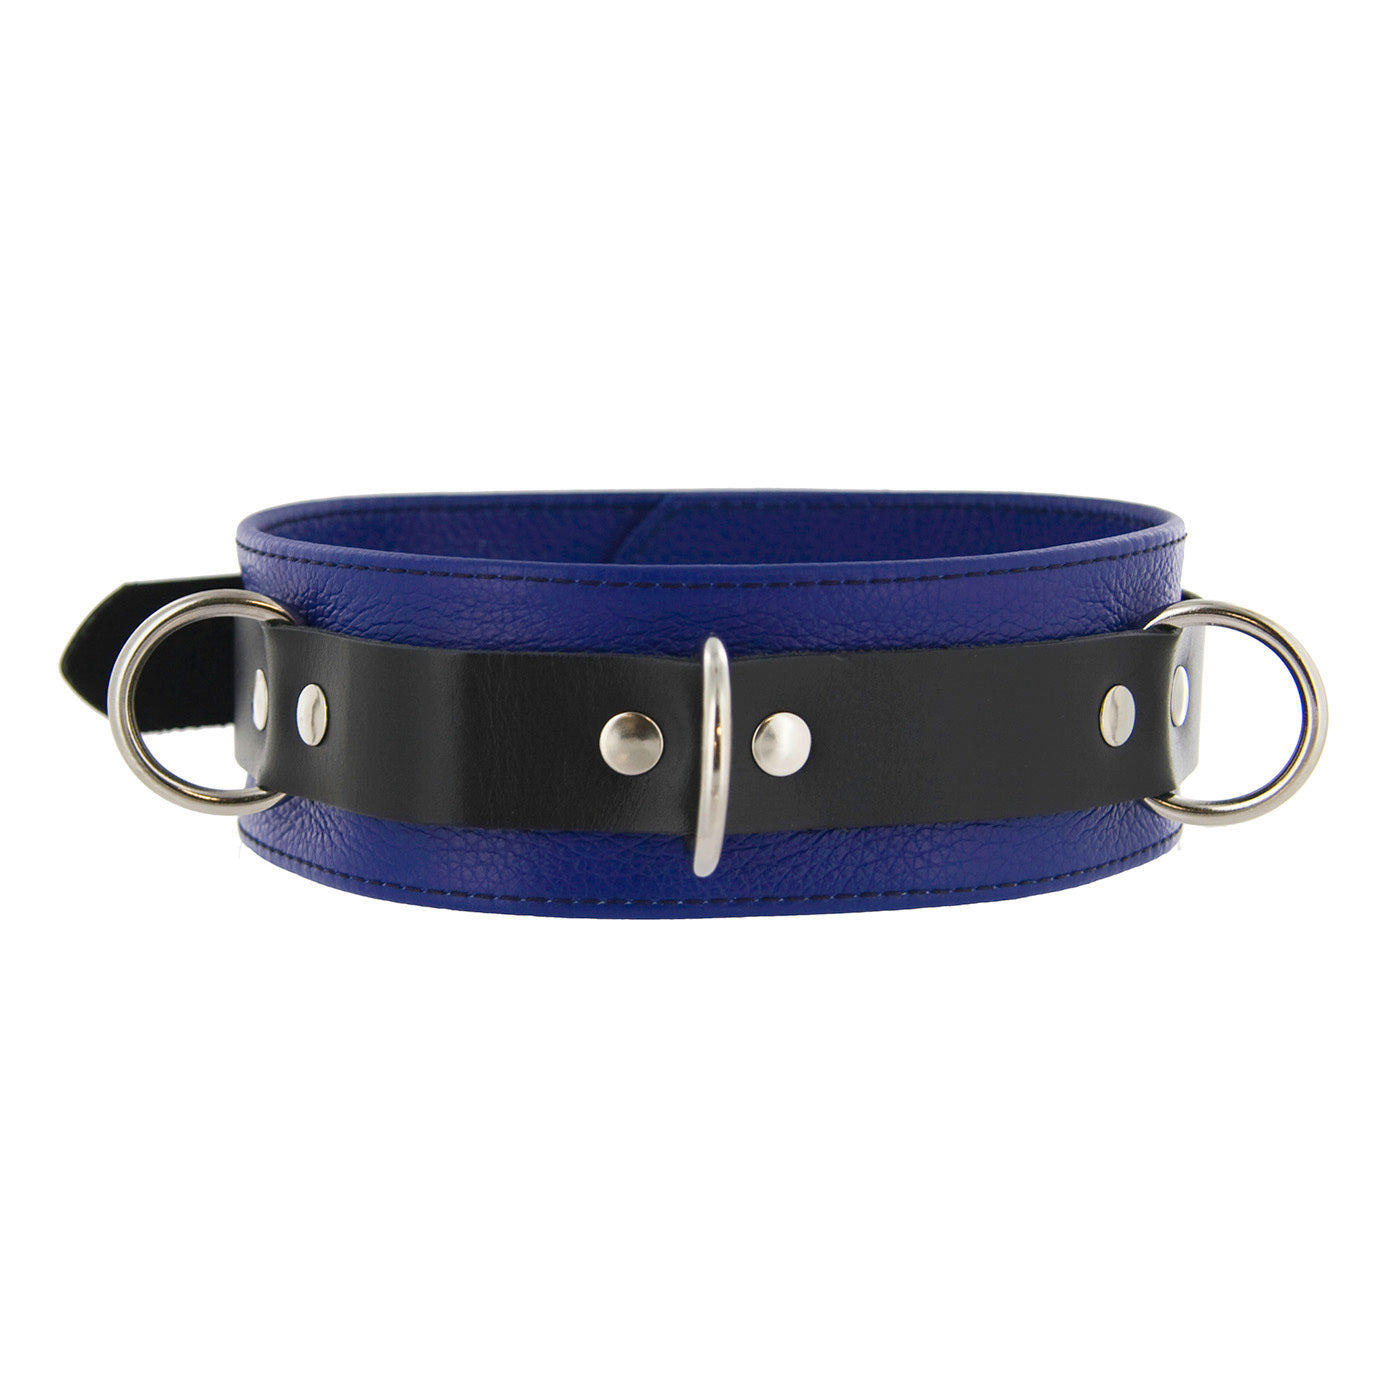 Strict Leather Deluxe Locking Collar - Blue and Black - UABDSM